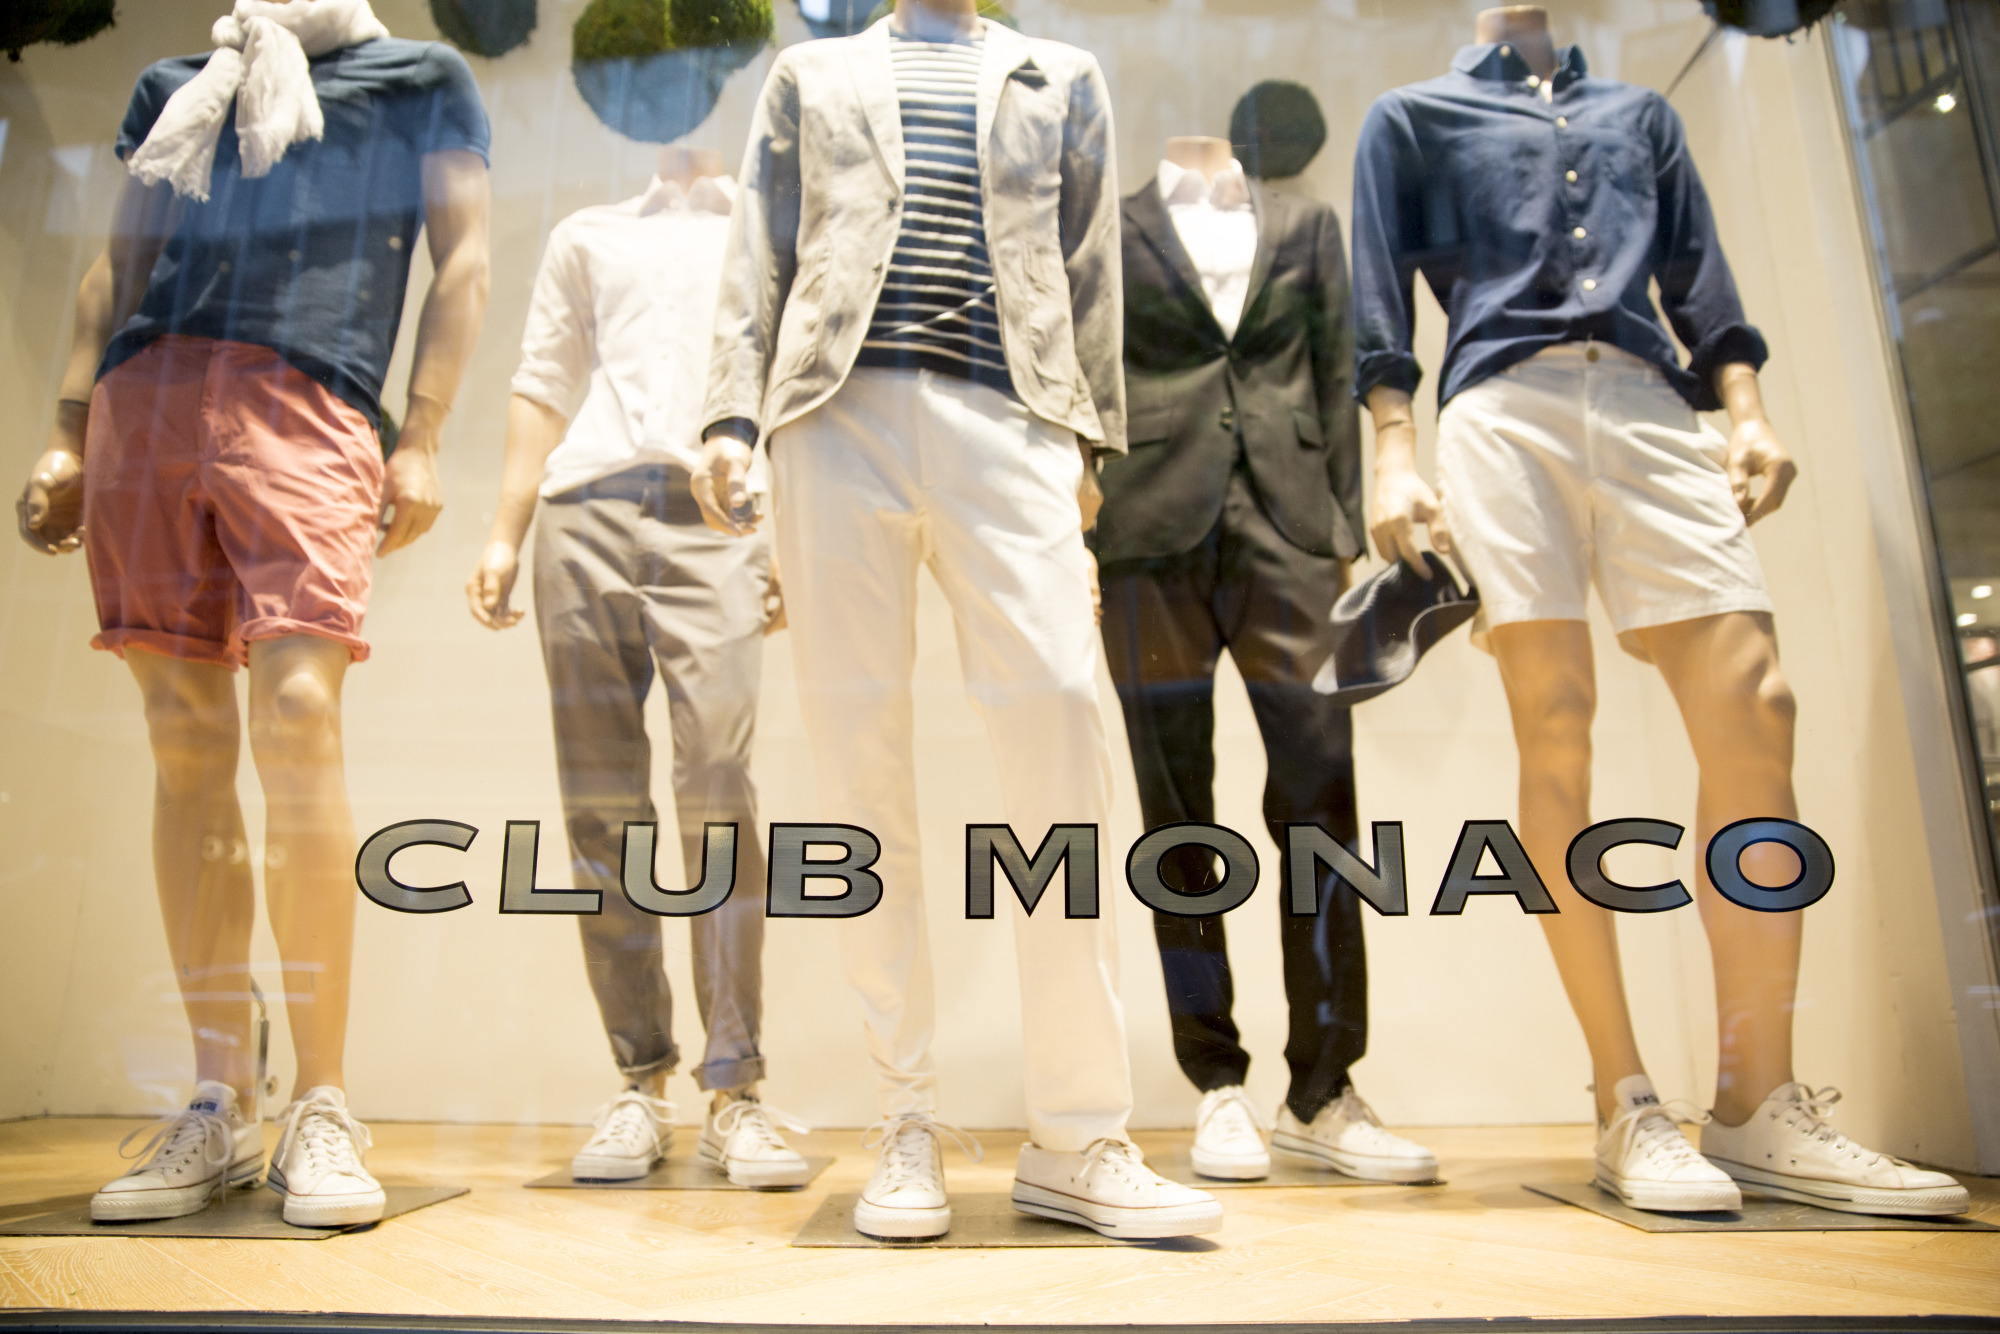 Ralph Lauren Sells Club Monaco Chain to Private Equity Firm